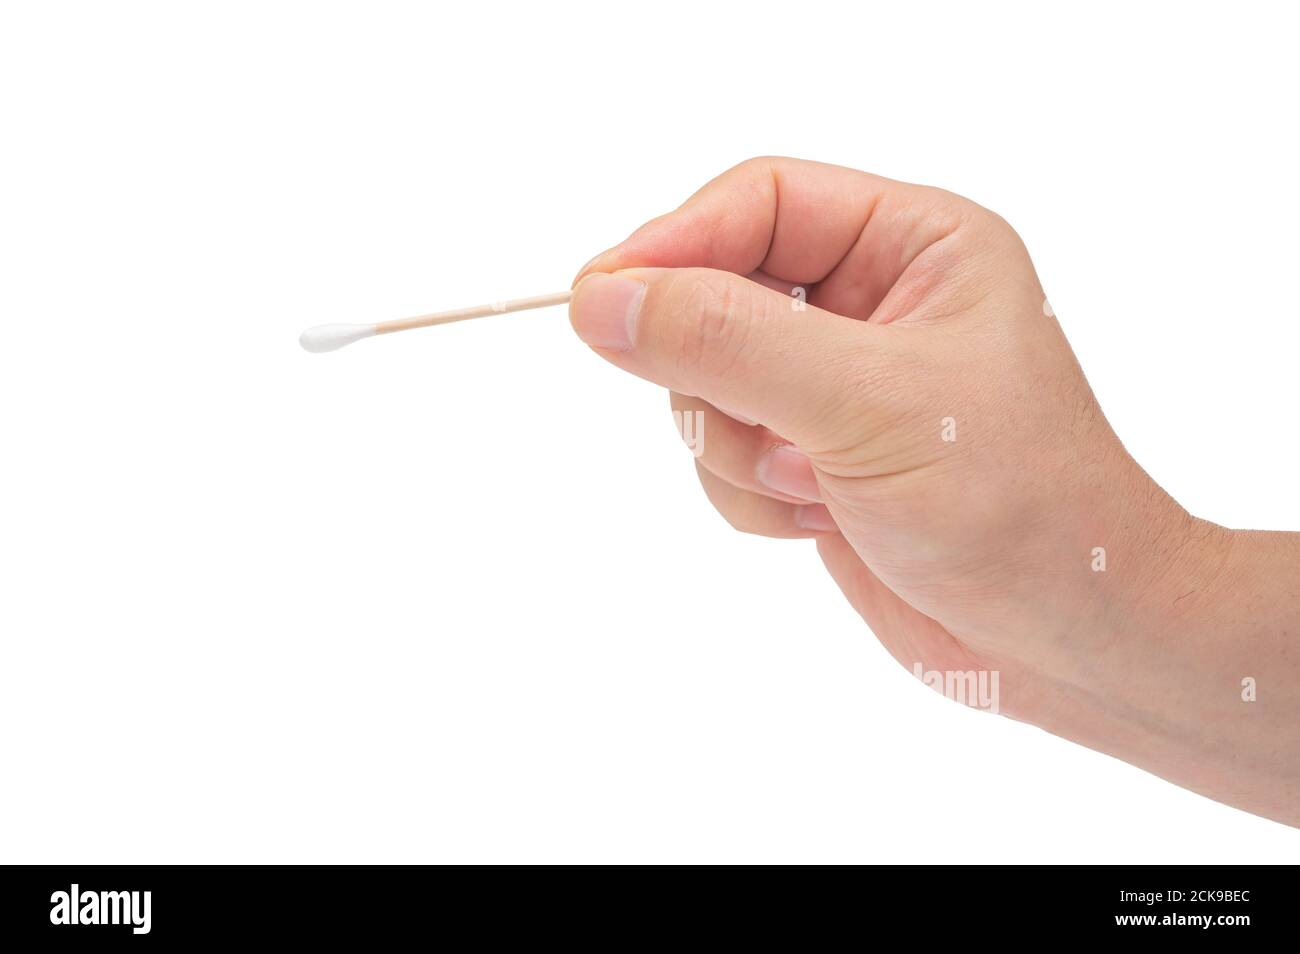 Close-up of a man's hand holding a cotton swab on a white background. Stock Photo